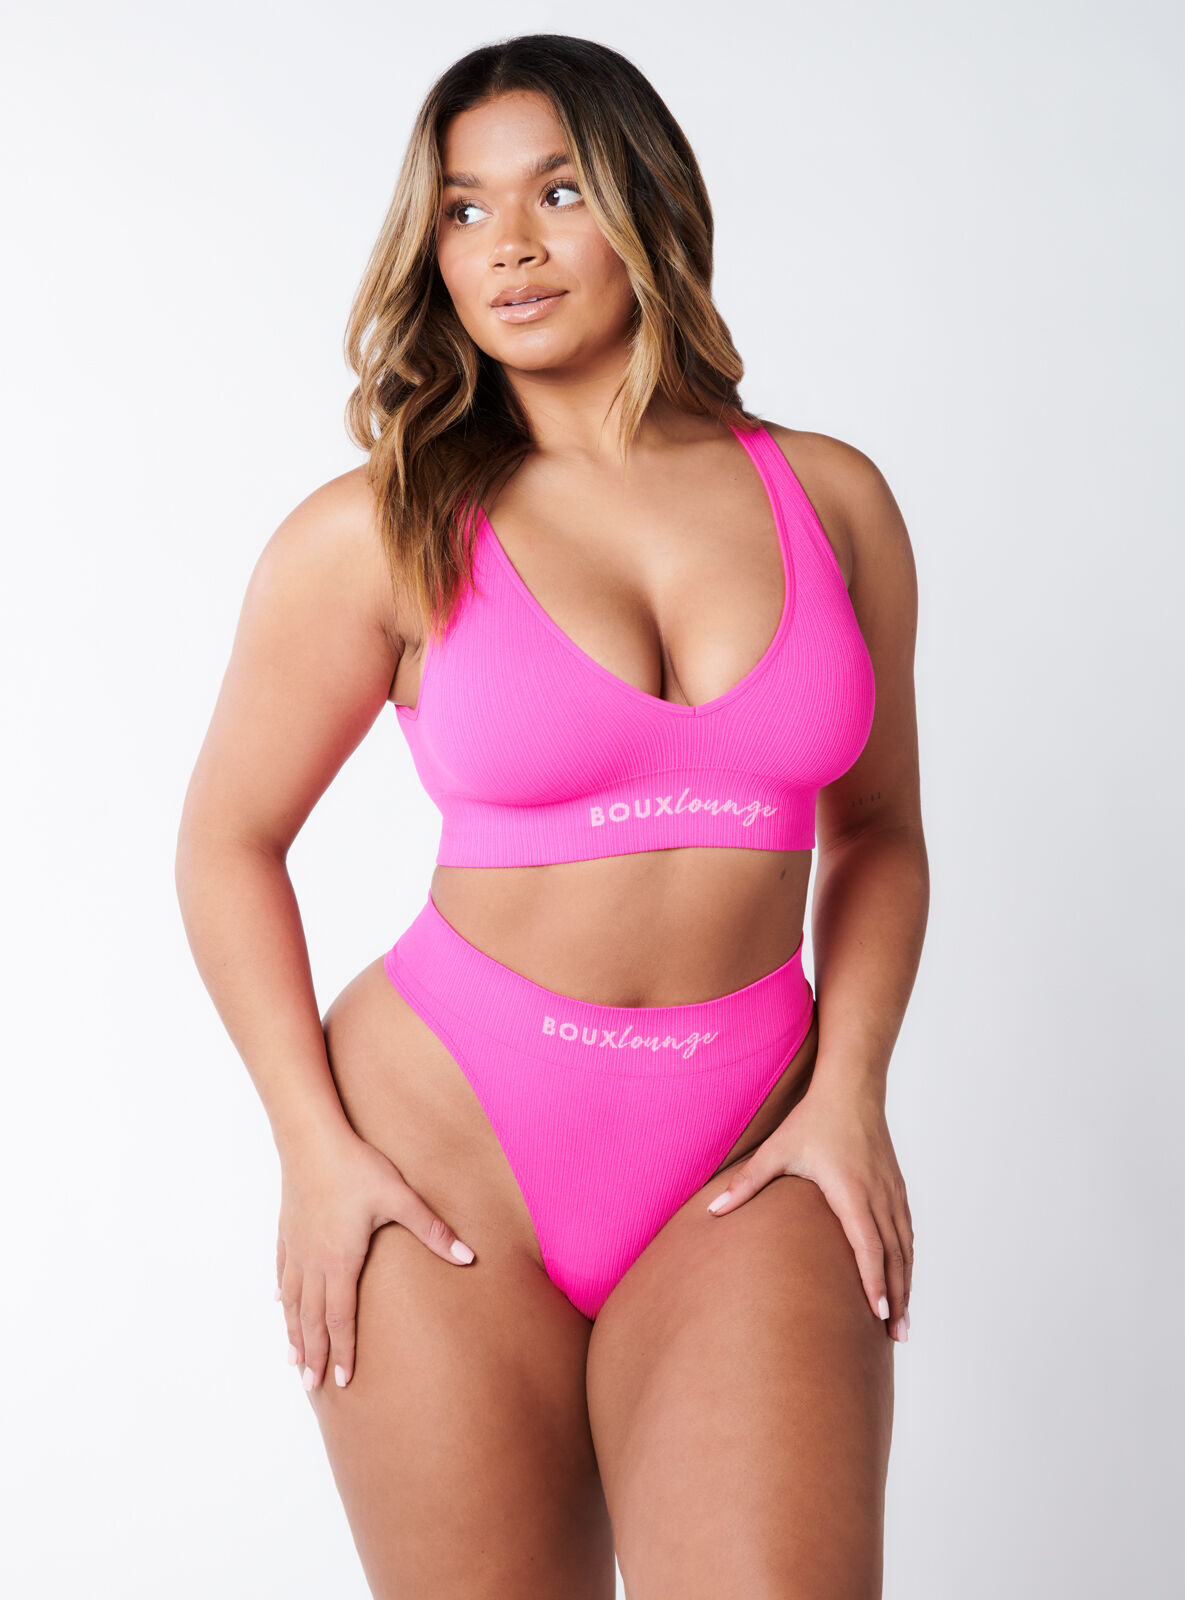 Boux Avenue Ribbed seamless lounge thong - Neon Pink - S